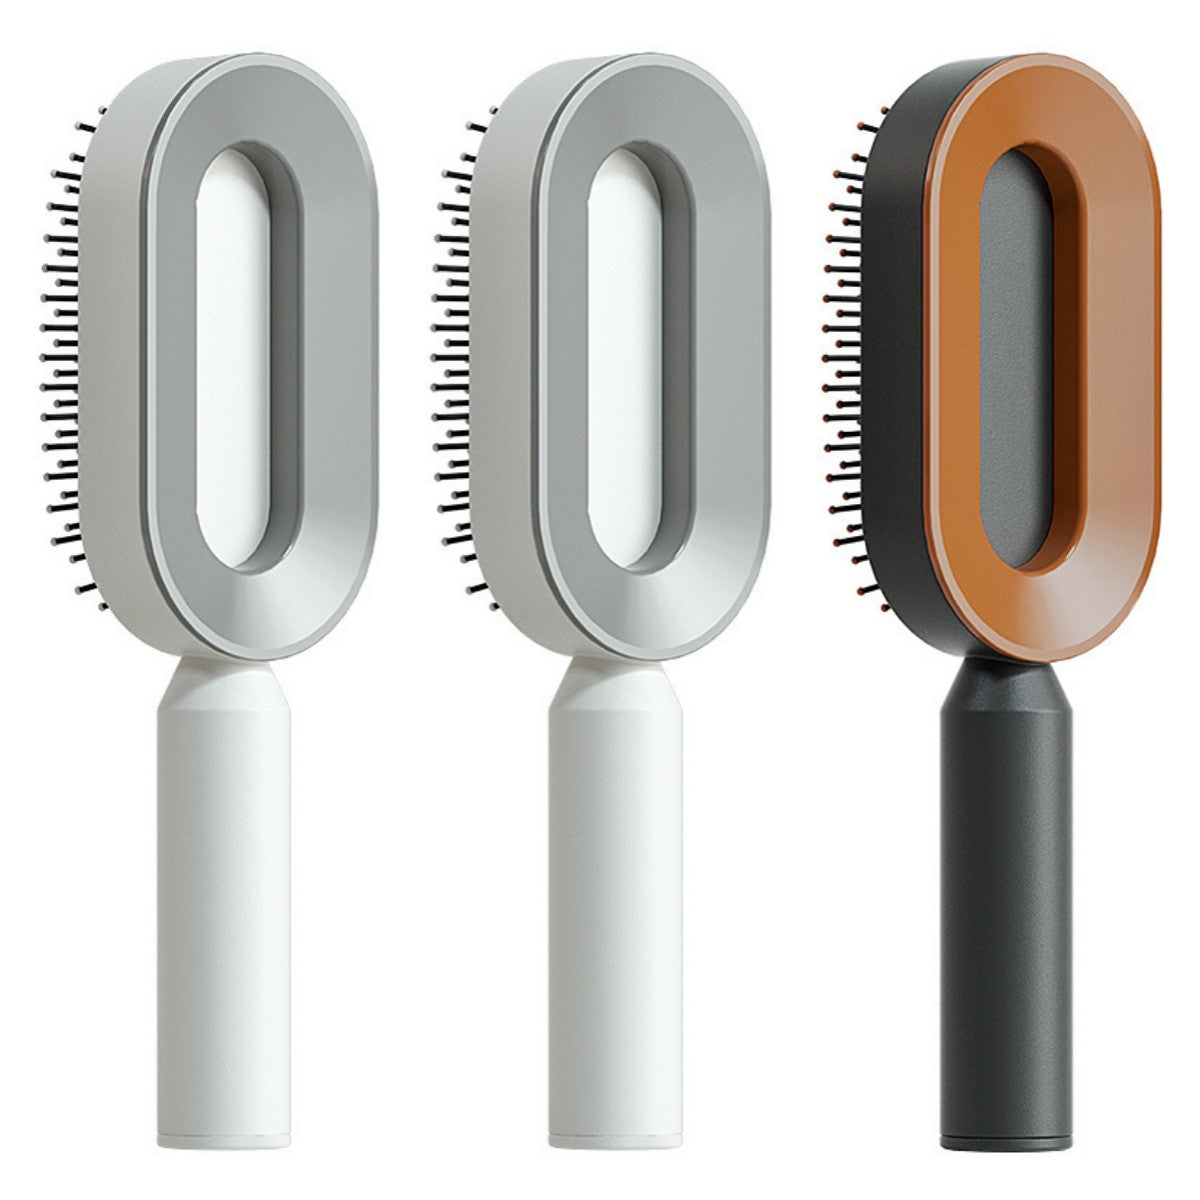 Self-Cleaning Hairbrush for Women. One-key Cleaning Airbag Massage Scalp Comb Anti-Static Hairbrush